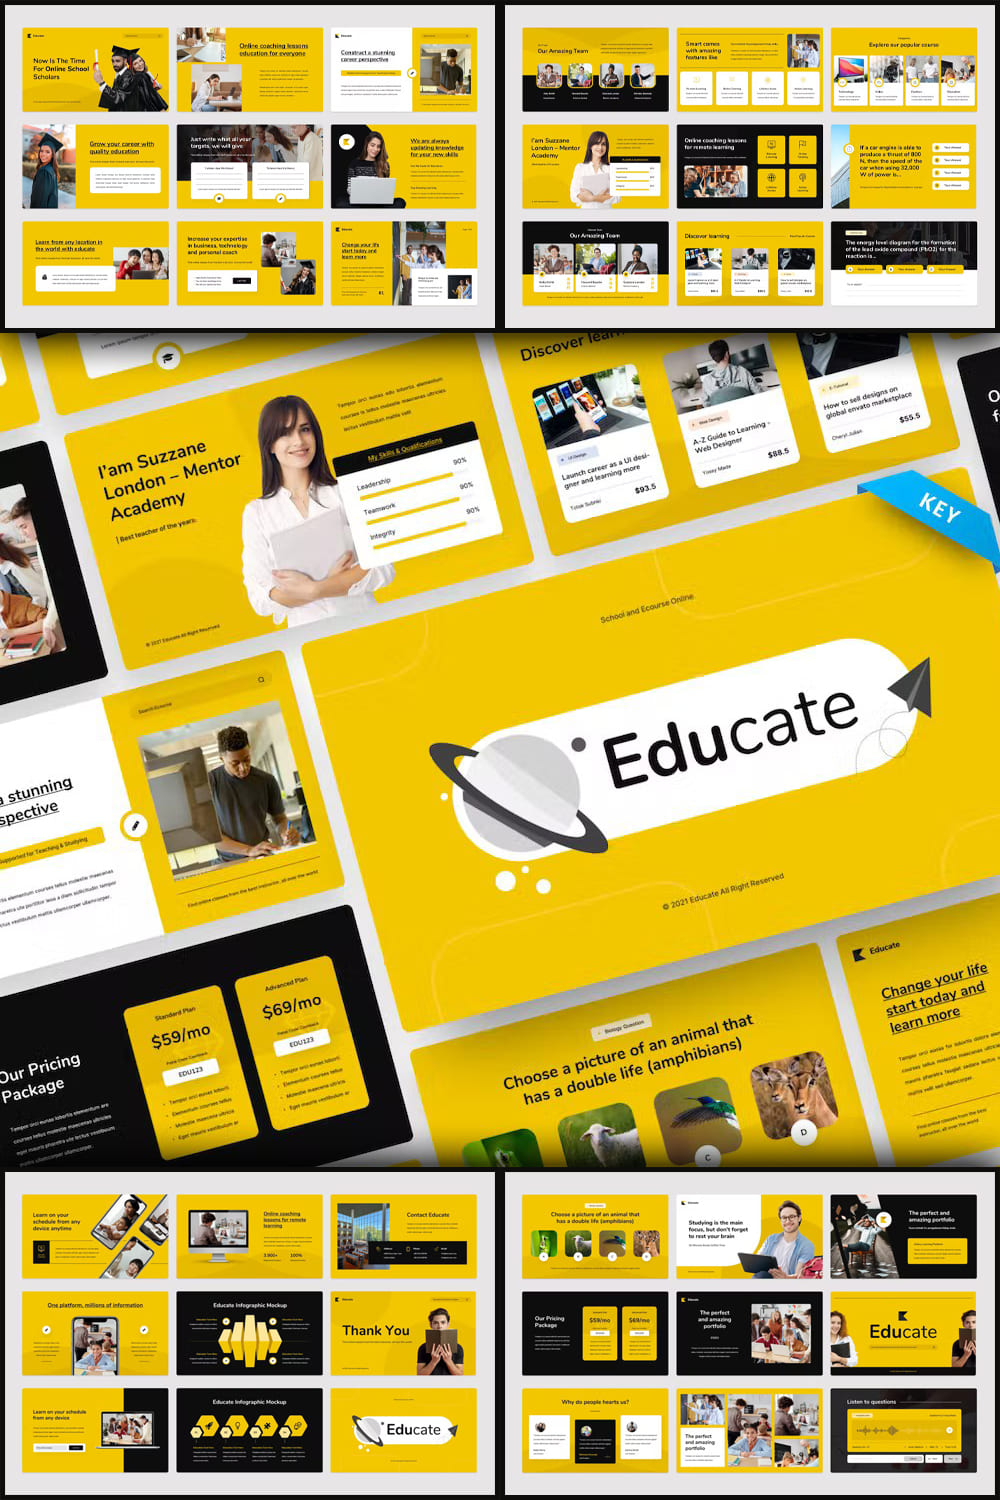 Pack of images of elegant presentation template slides in yellow and black colors.